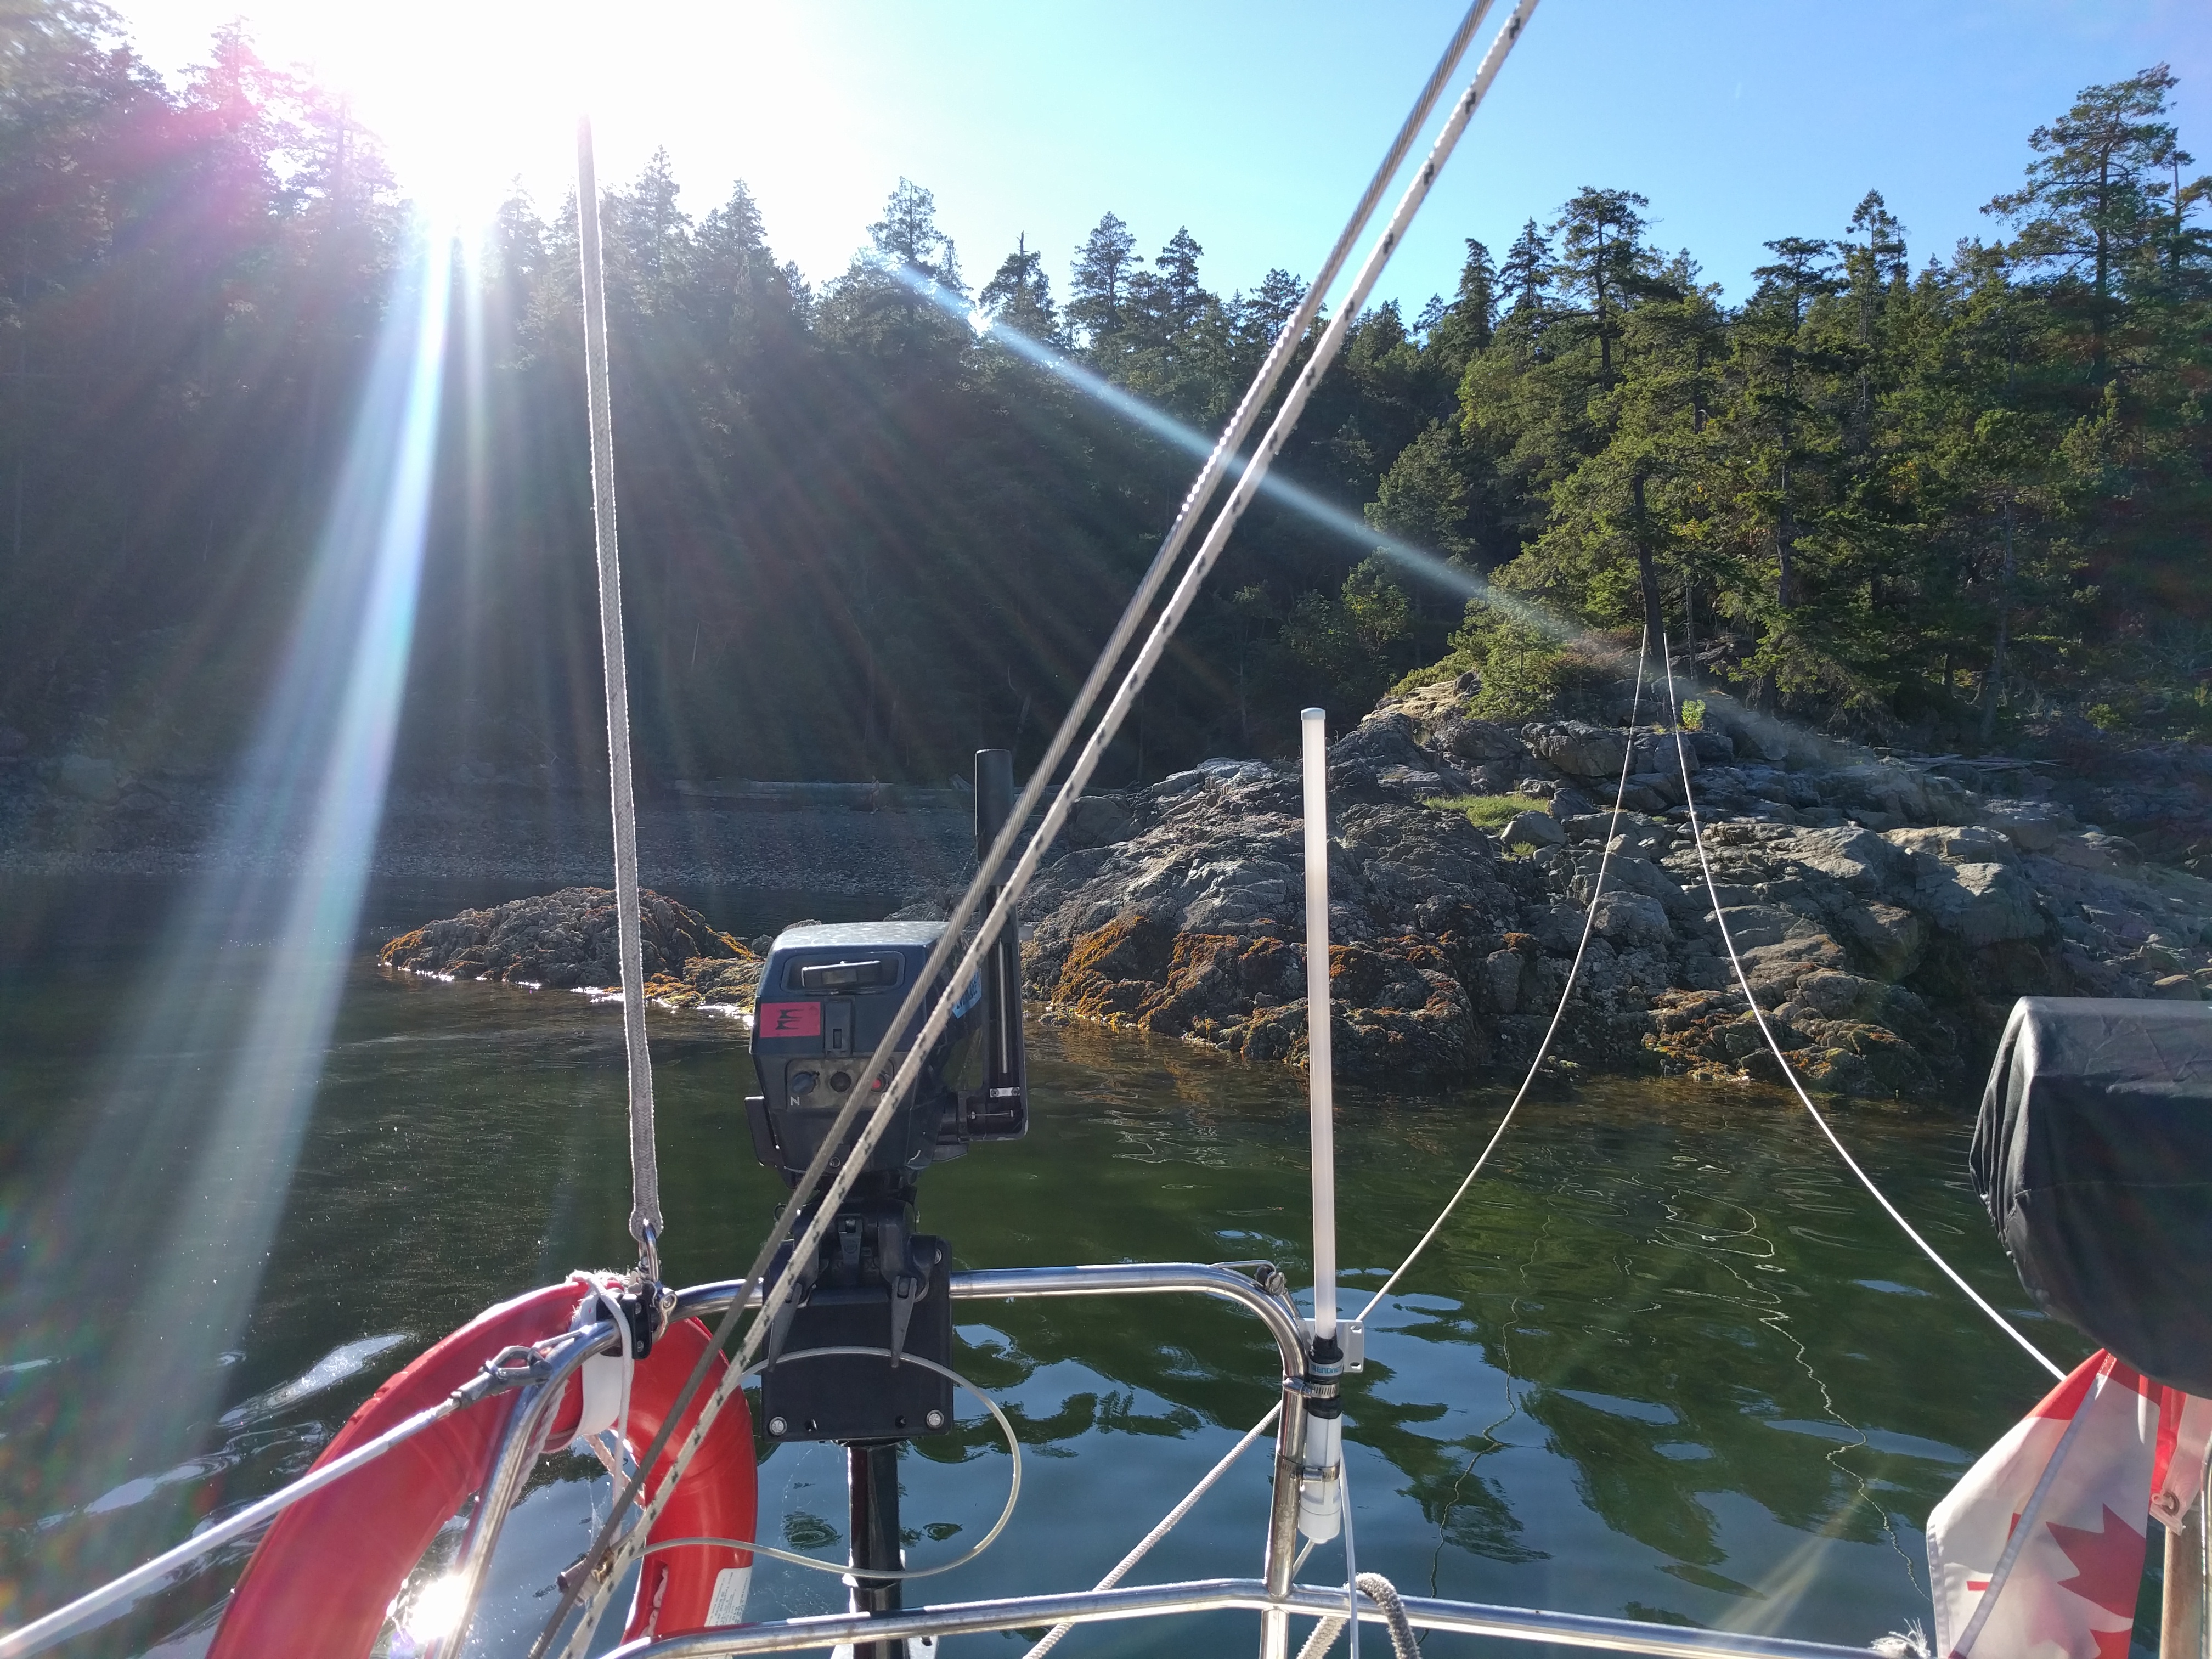 Days 1 to 4: Travelling through the Gulf Islands